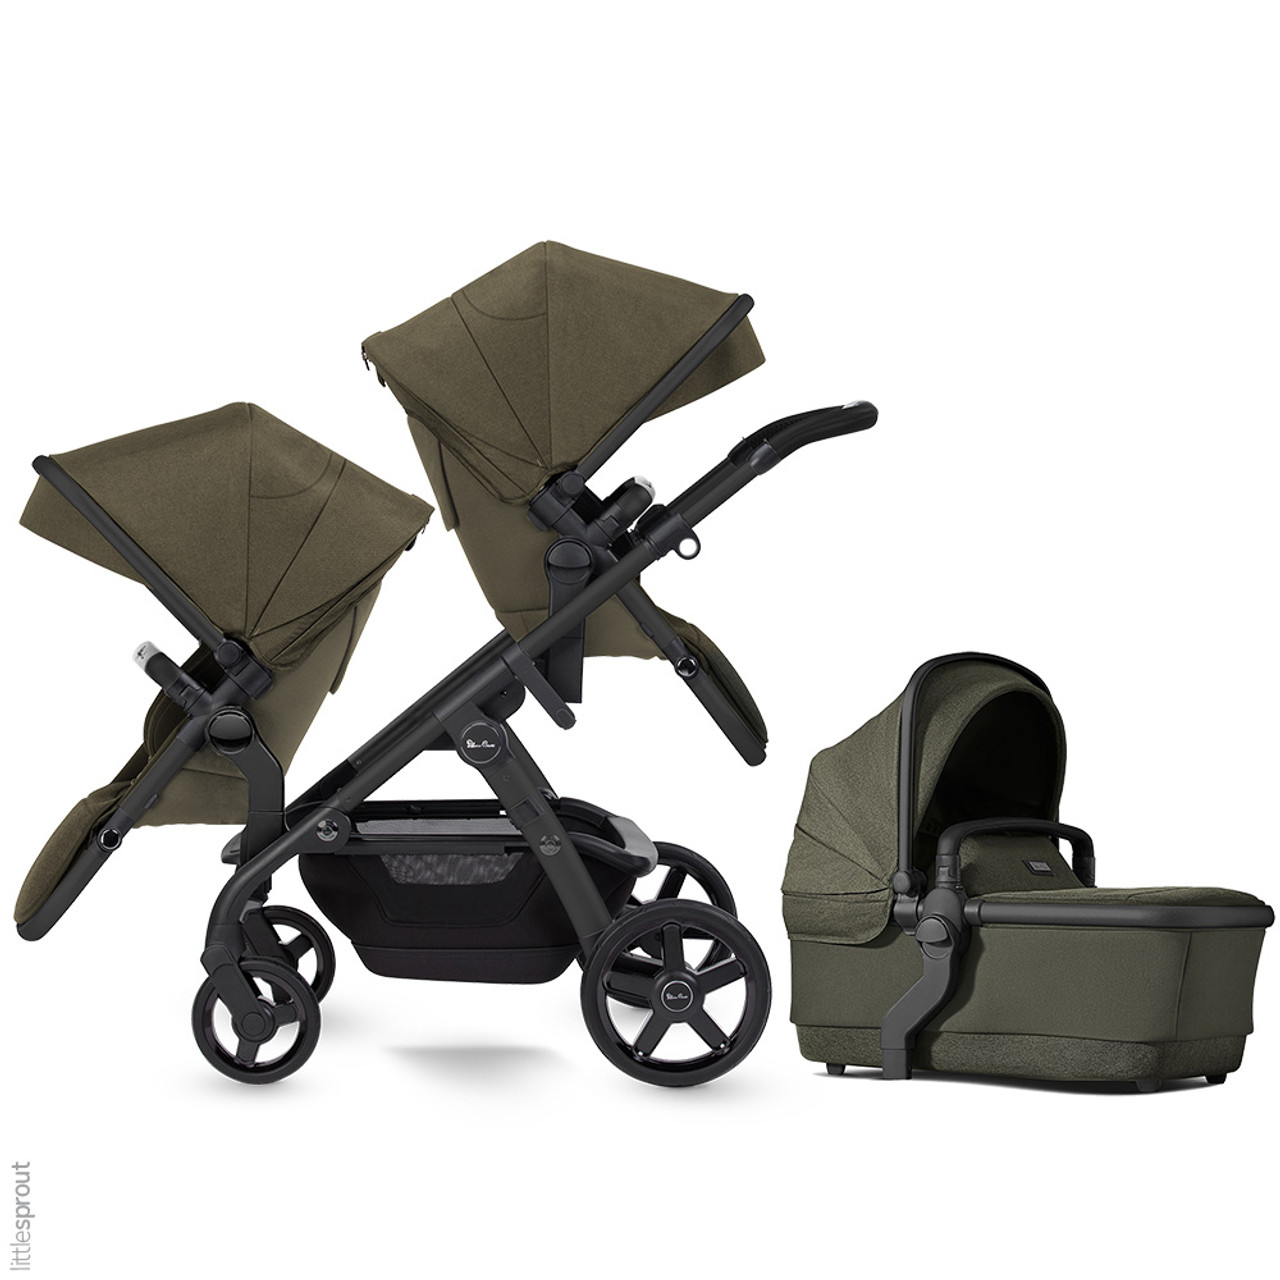 Meet Our Family of Strollers